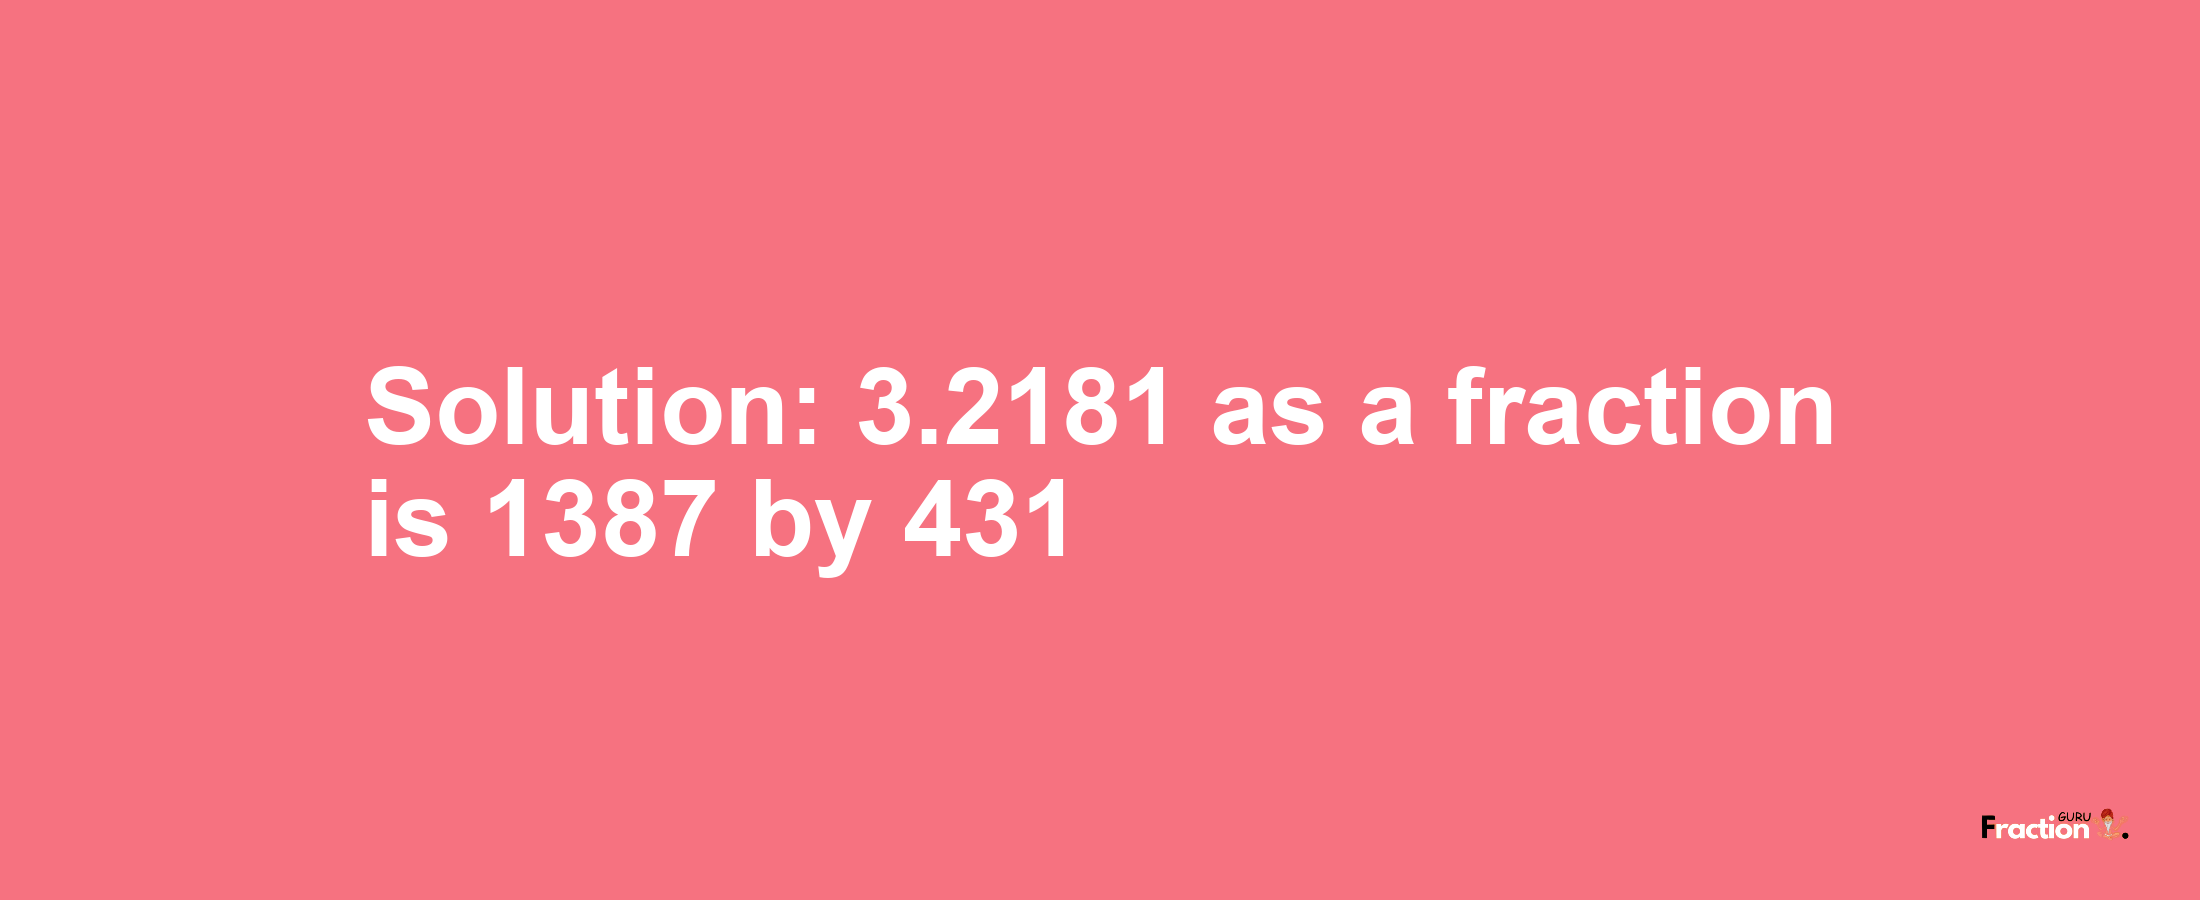 Solution:3.2181 as a fraction is 1387/431